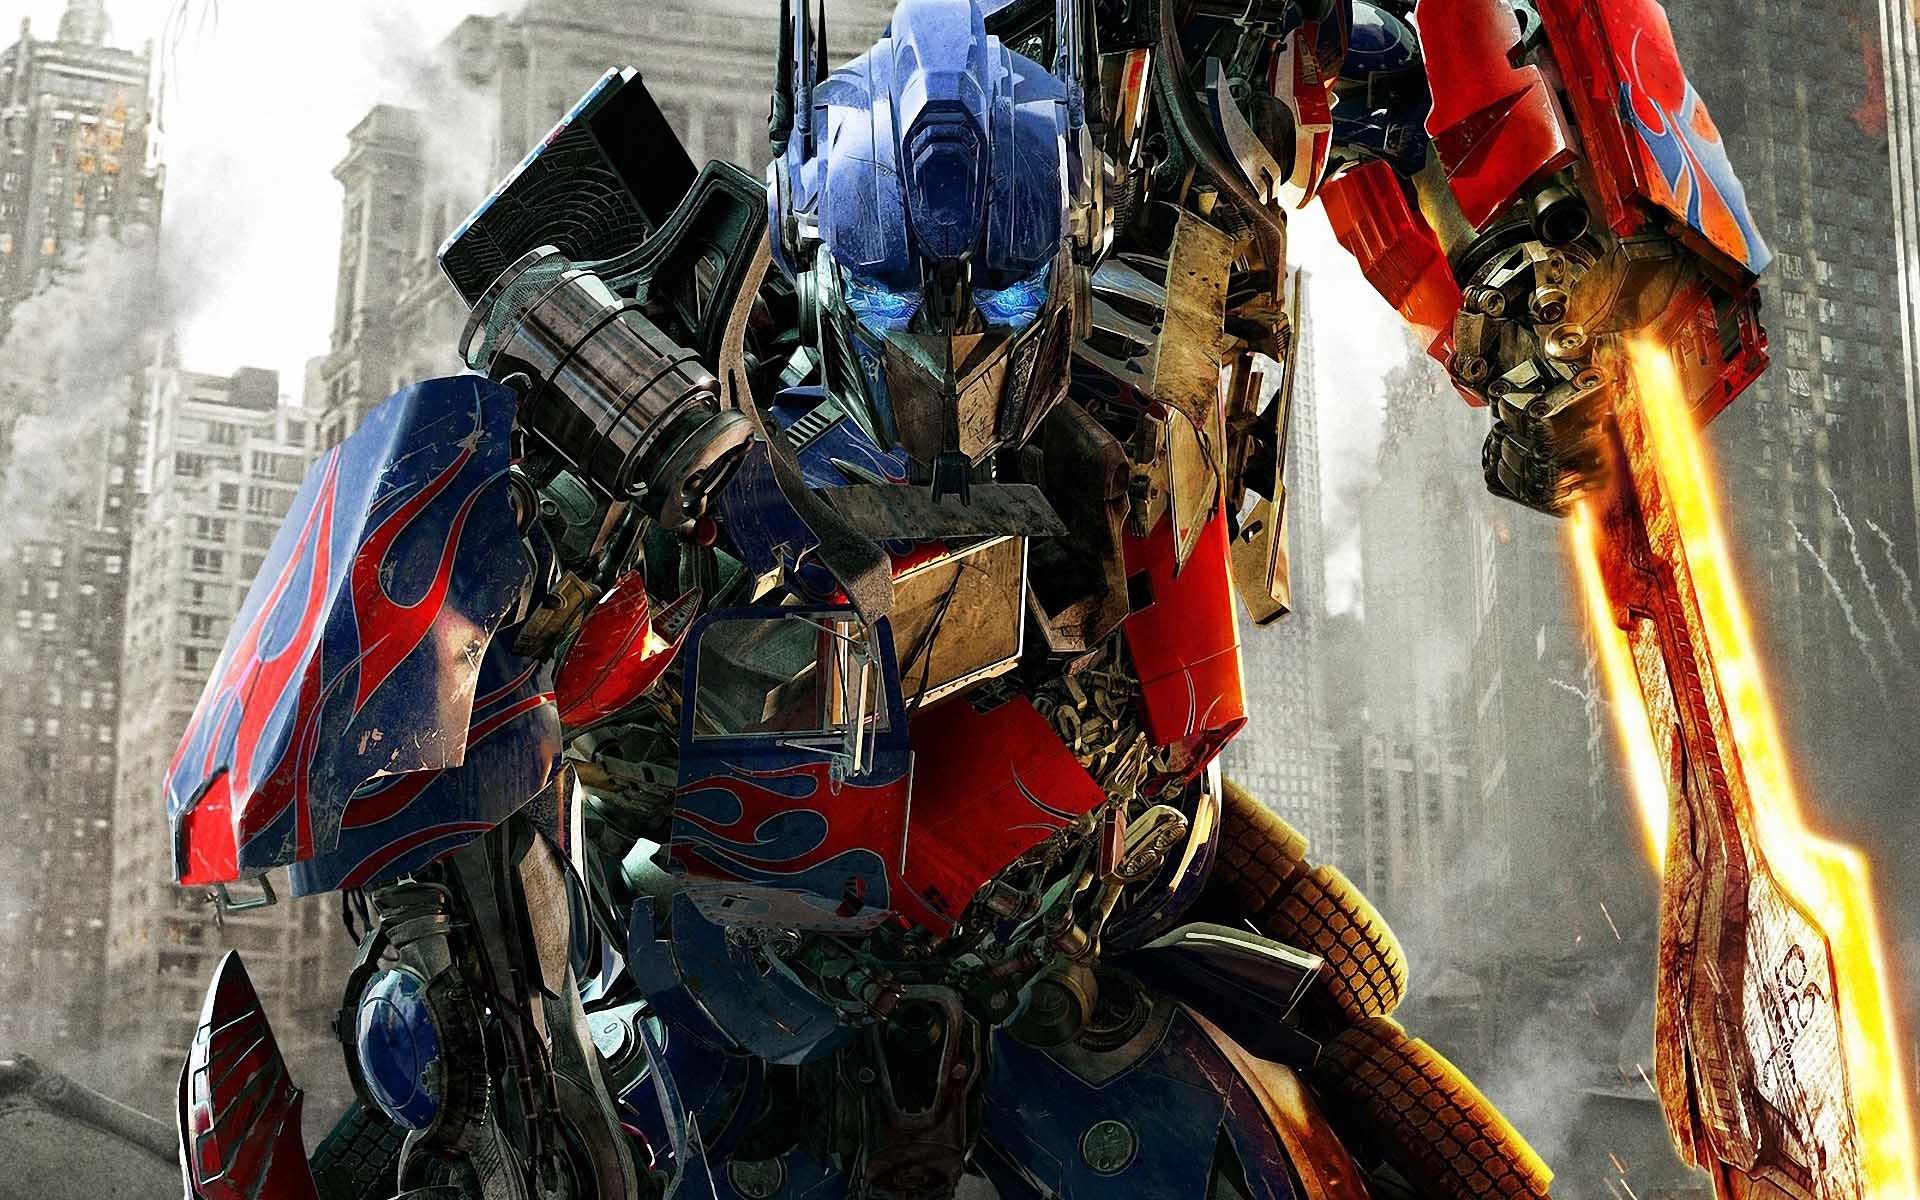 exec-reveals-transformers-5-will-change-the-franchise-forever-transformers-5-will-change-719409.jpg